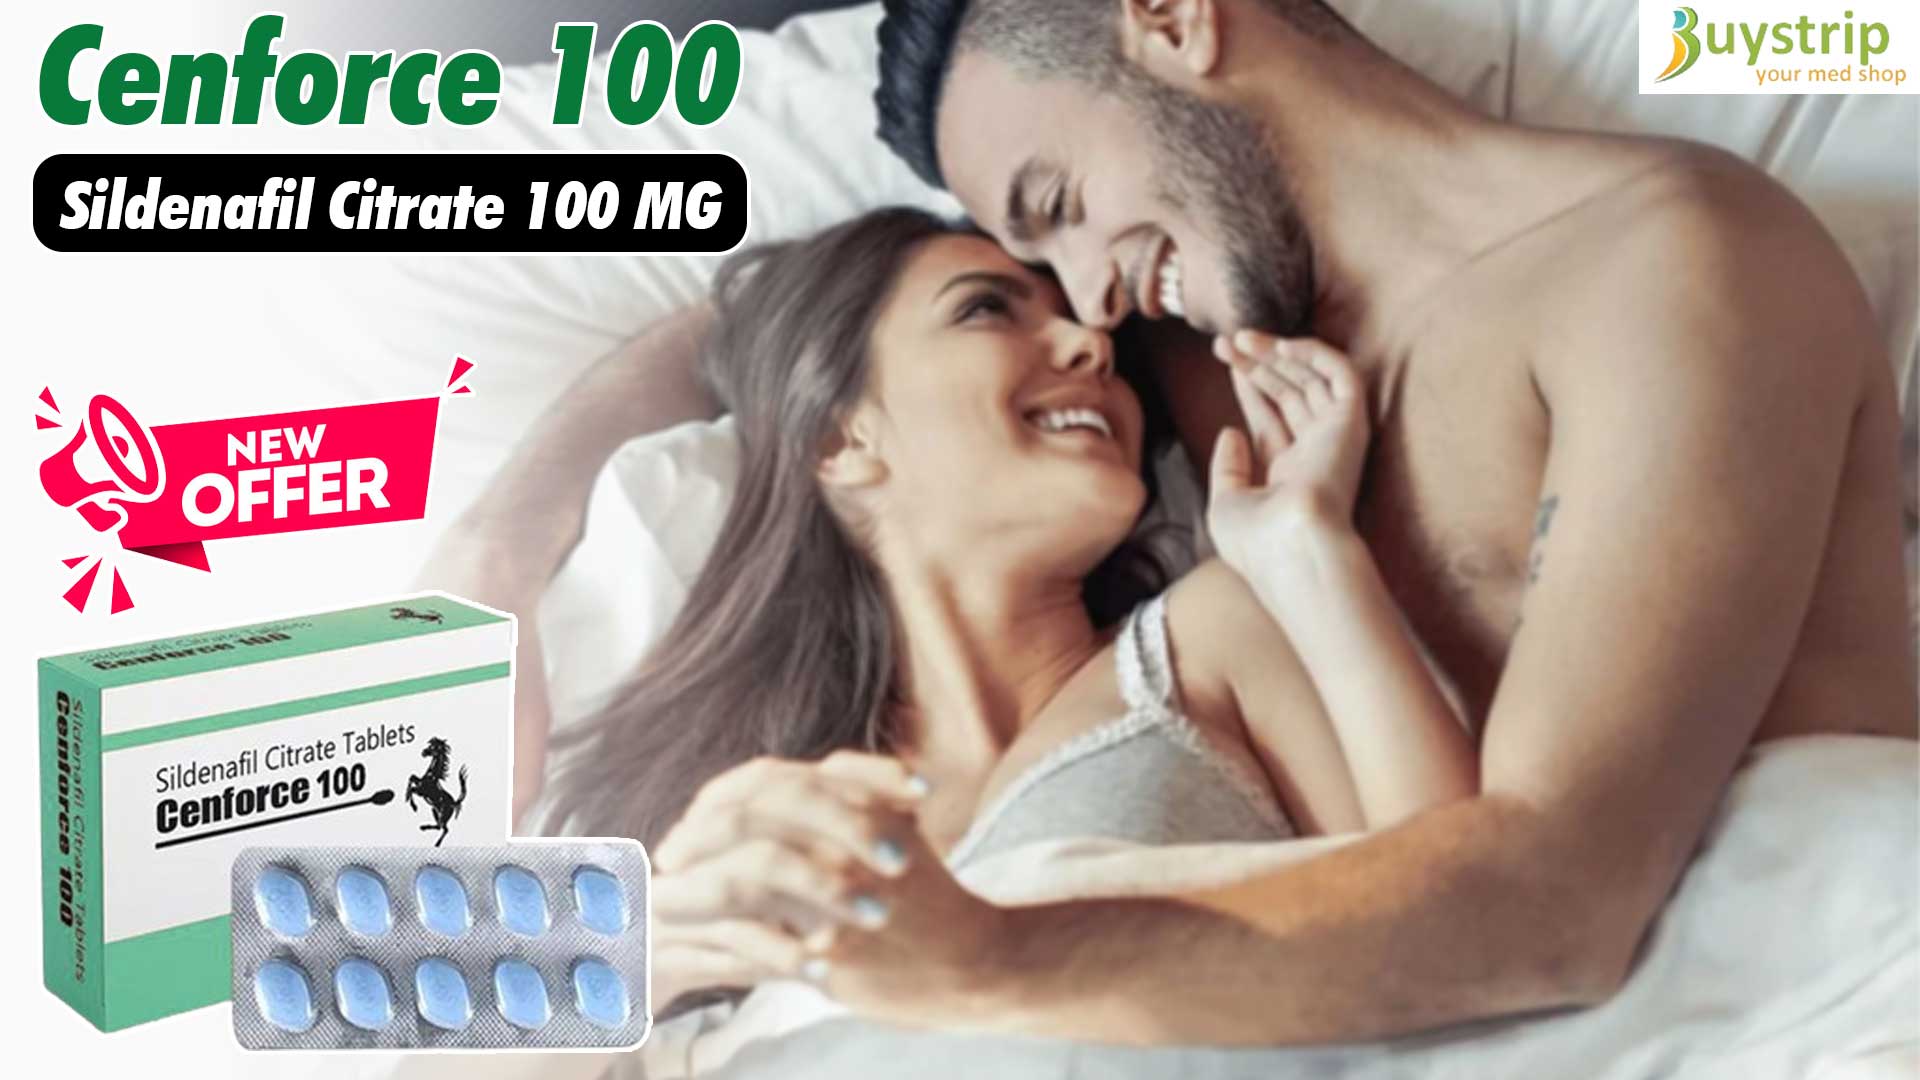 Improving Overall Well-Being with Cenforce 100